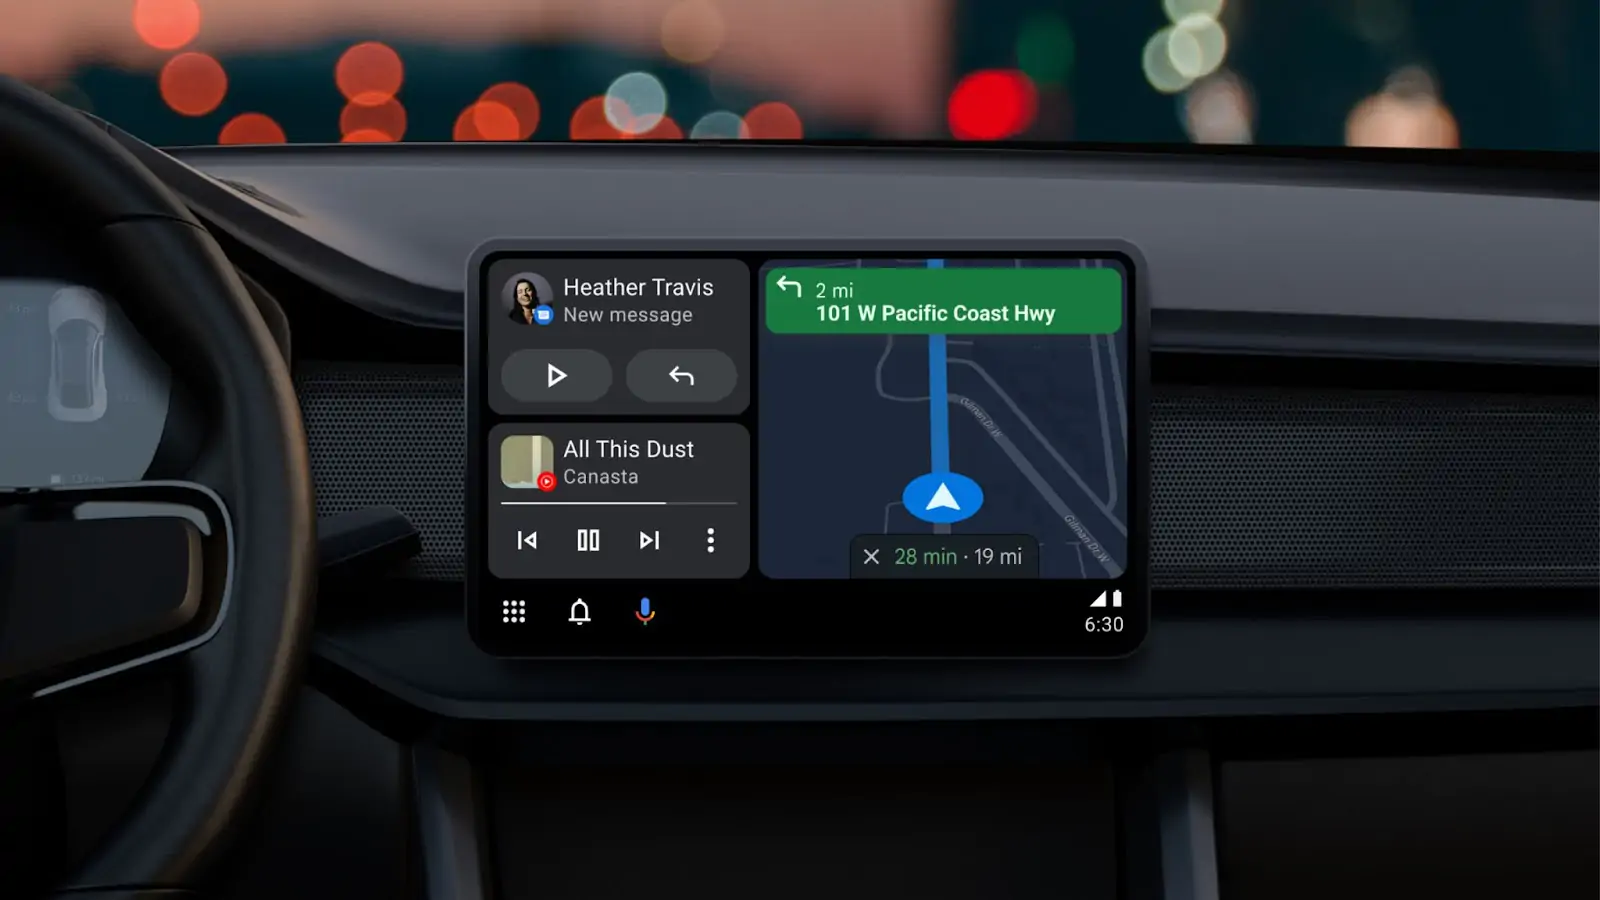 Android Auto 11.3: AI-based features arrive